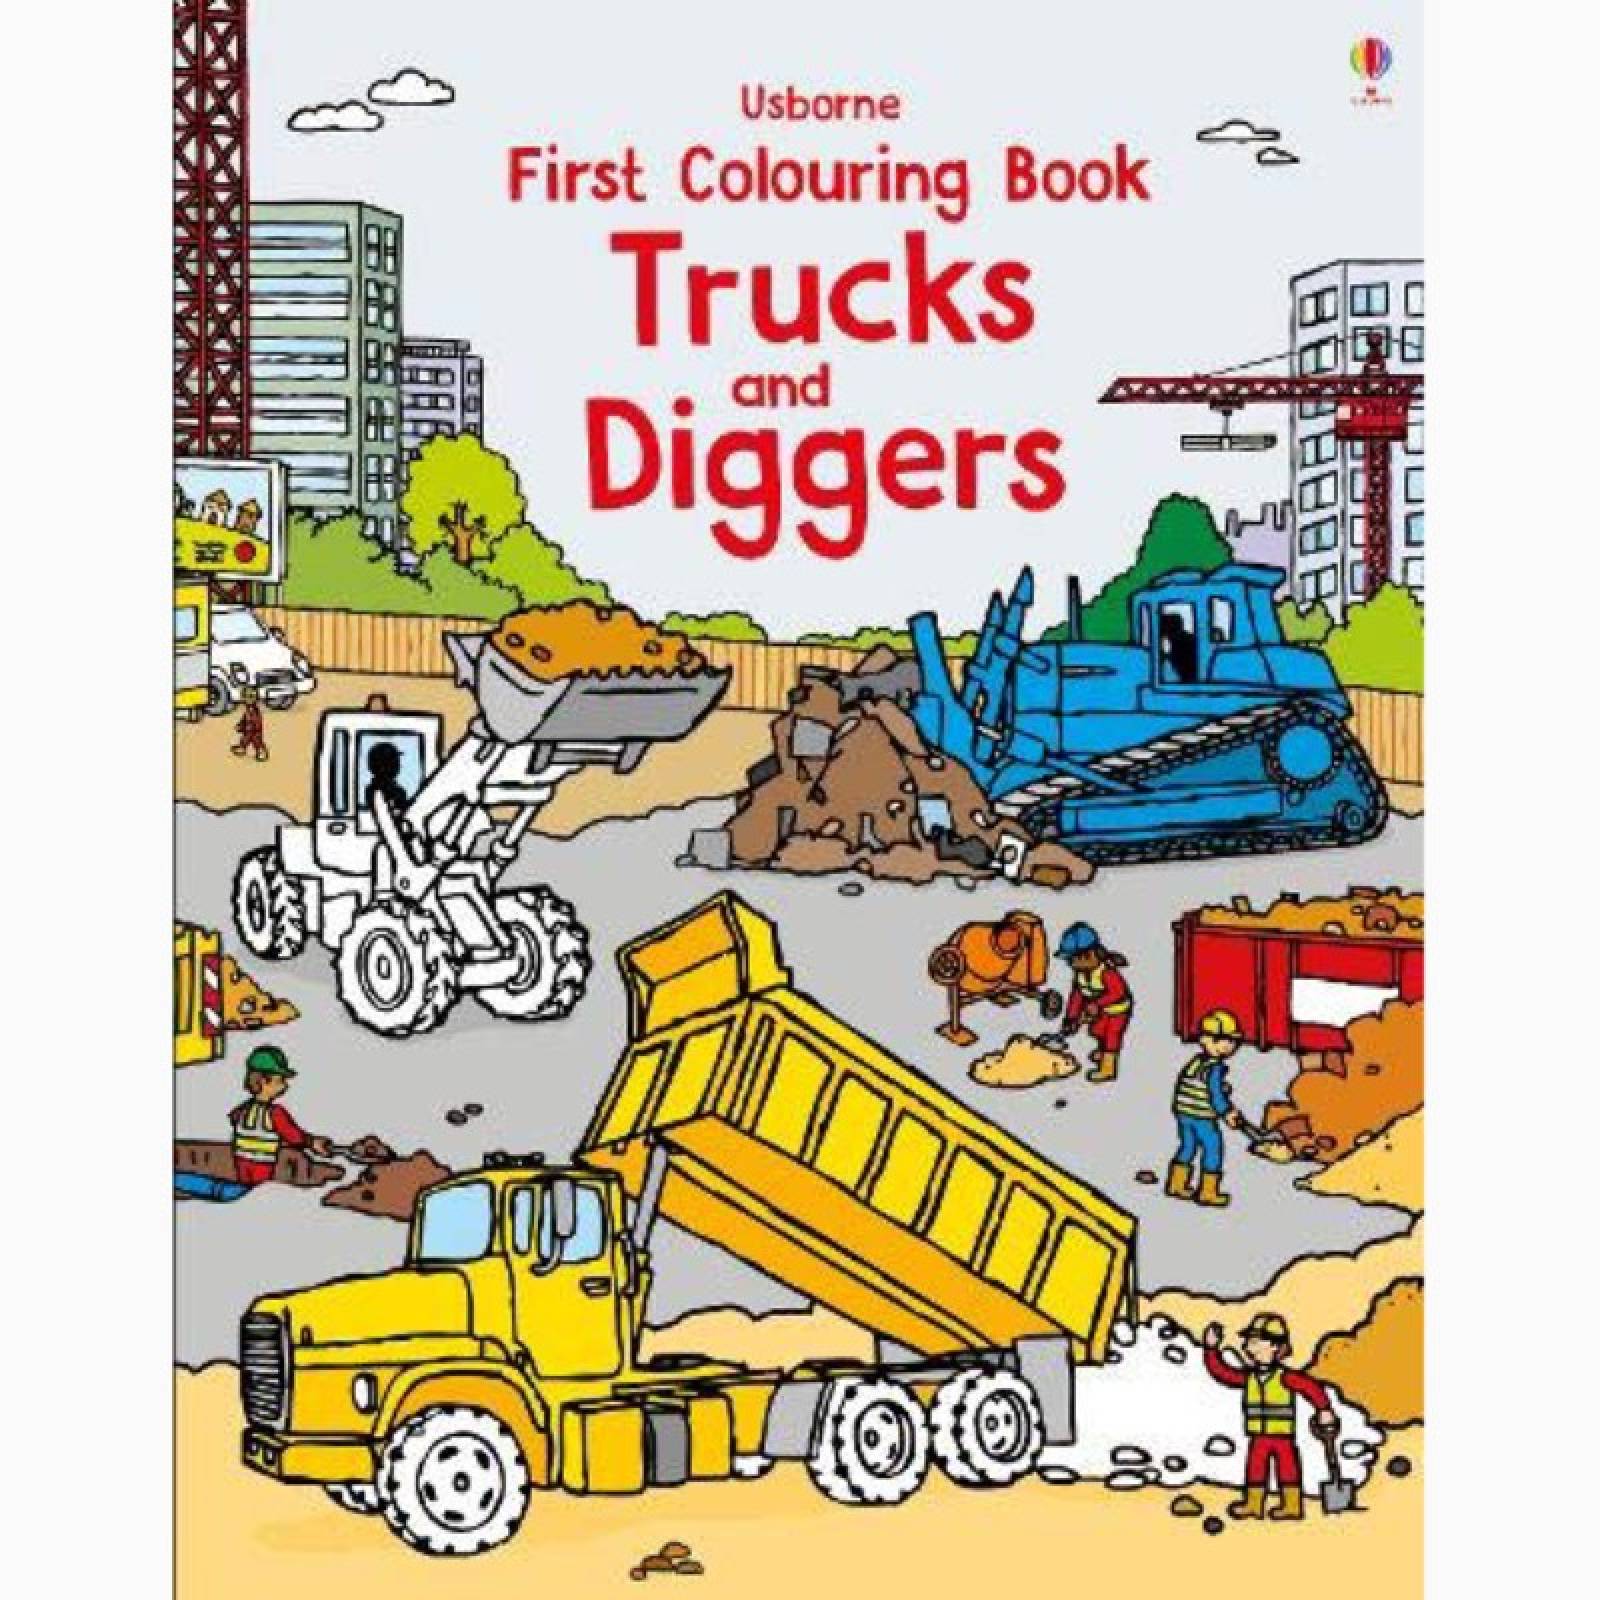 Trucks & Diggers - First Colouring Book